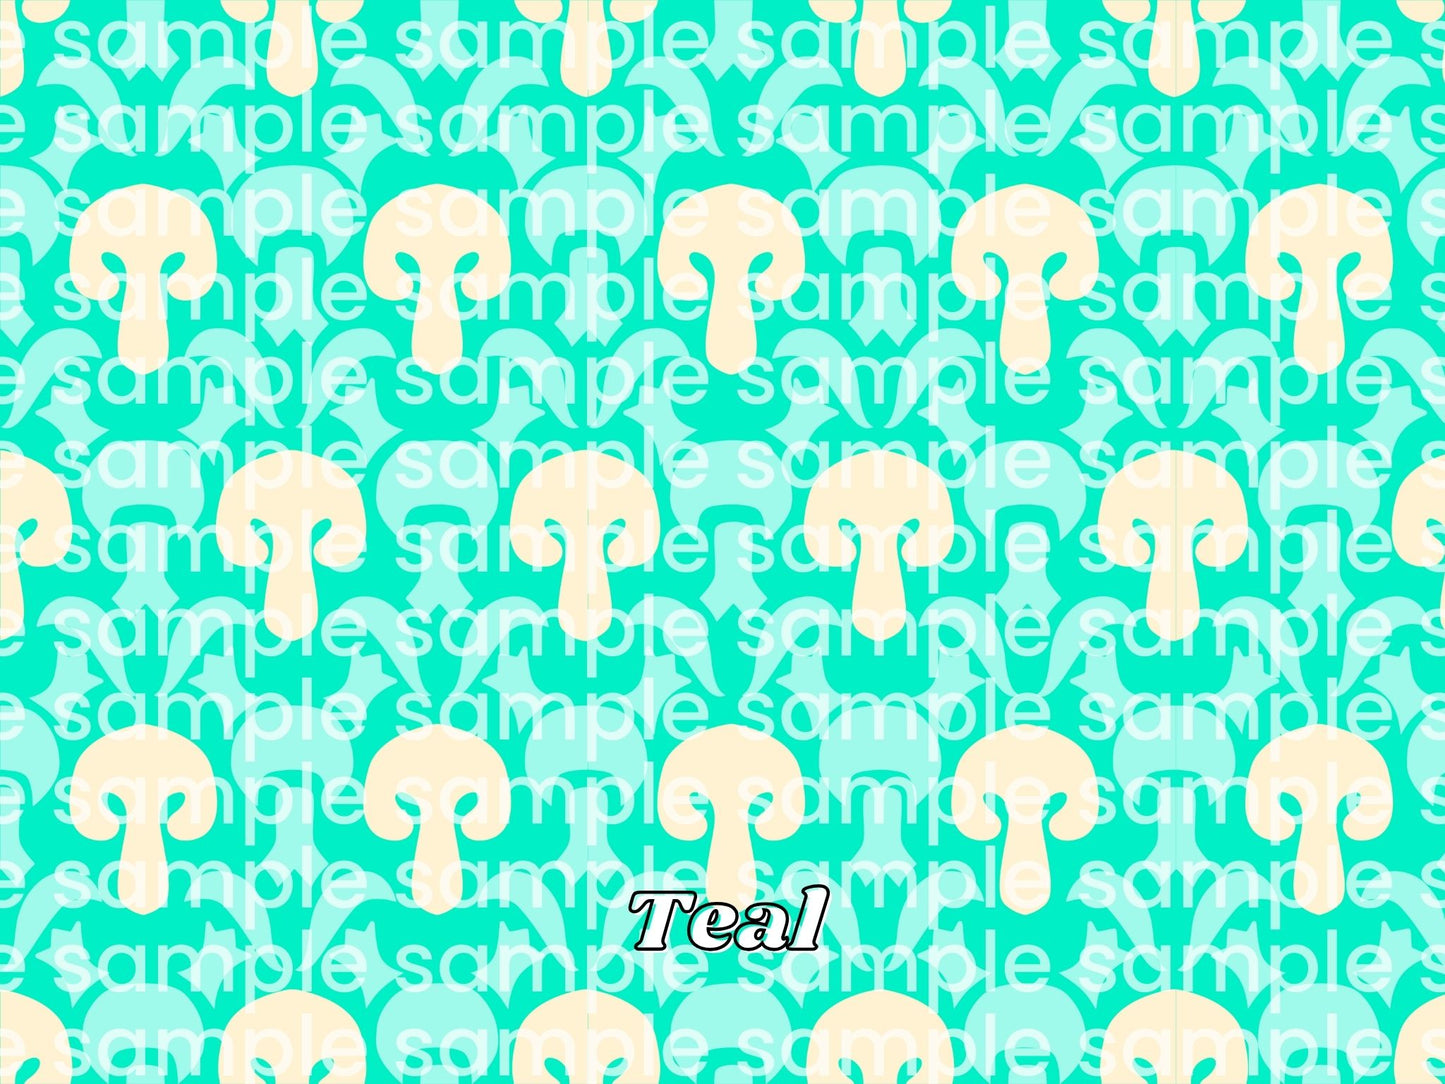 Cece's Mushroom Pattern Printable Cosplay Template | Instant Download Digital Cut Files for Cosplay